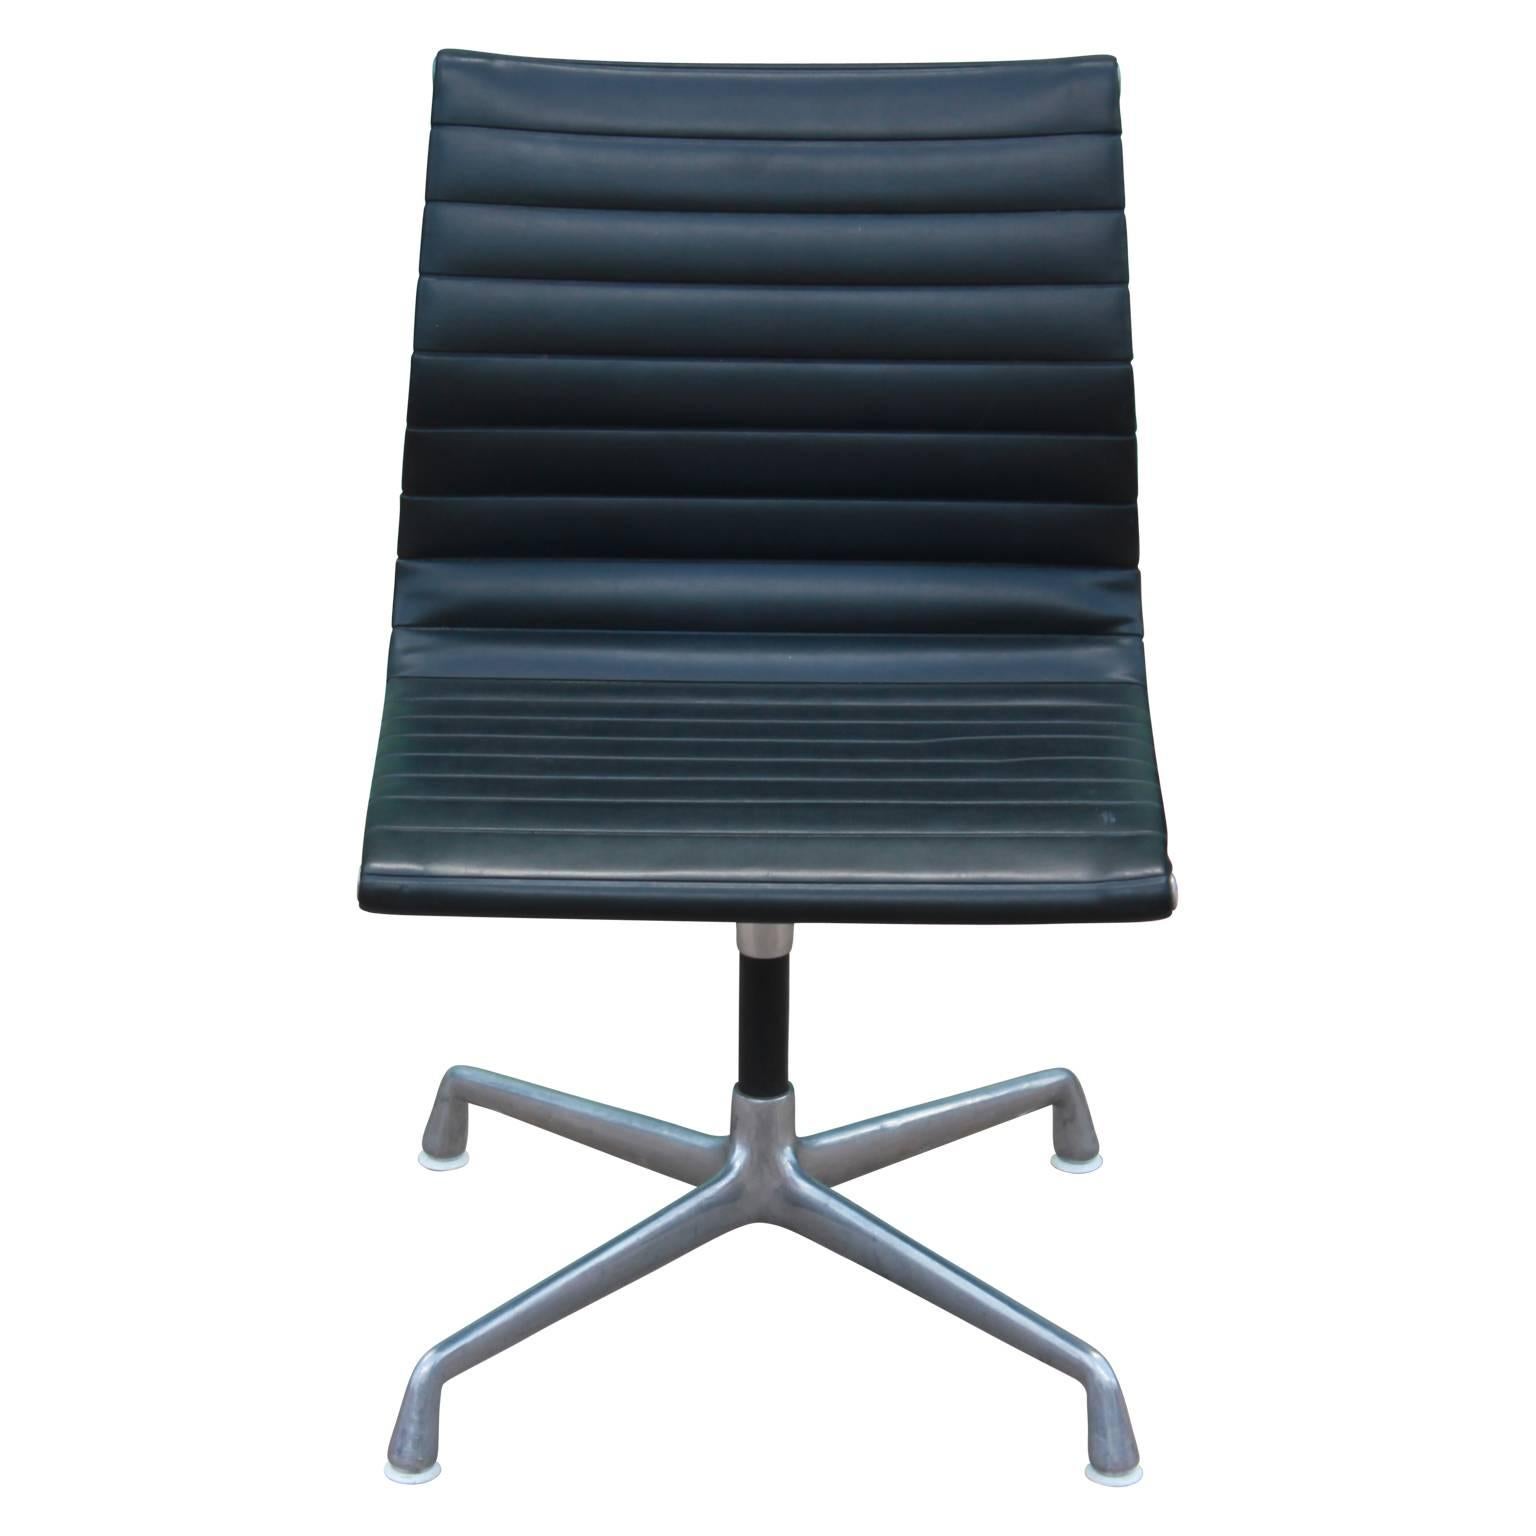 Pair of Charles Eames for Herman Miller aluminum group armless office chairs. Made in the mid-1960s with aluminum and Naugahyde and are wonderful for an office or desk.